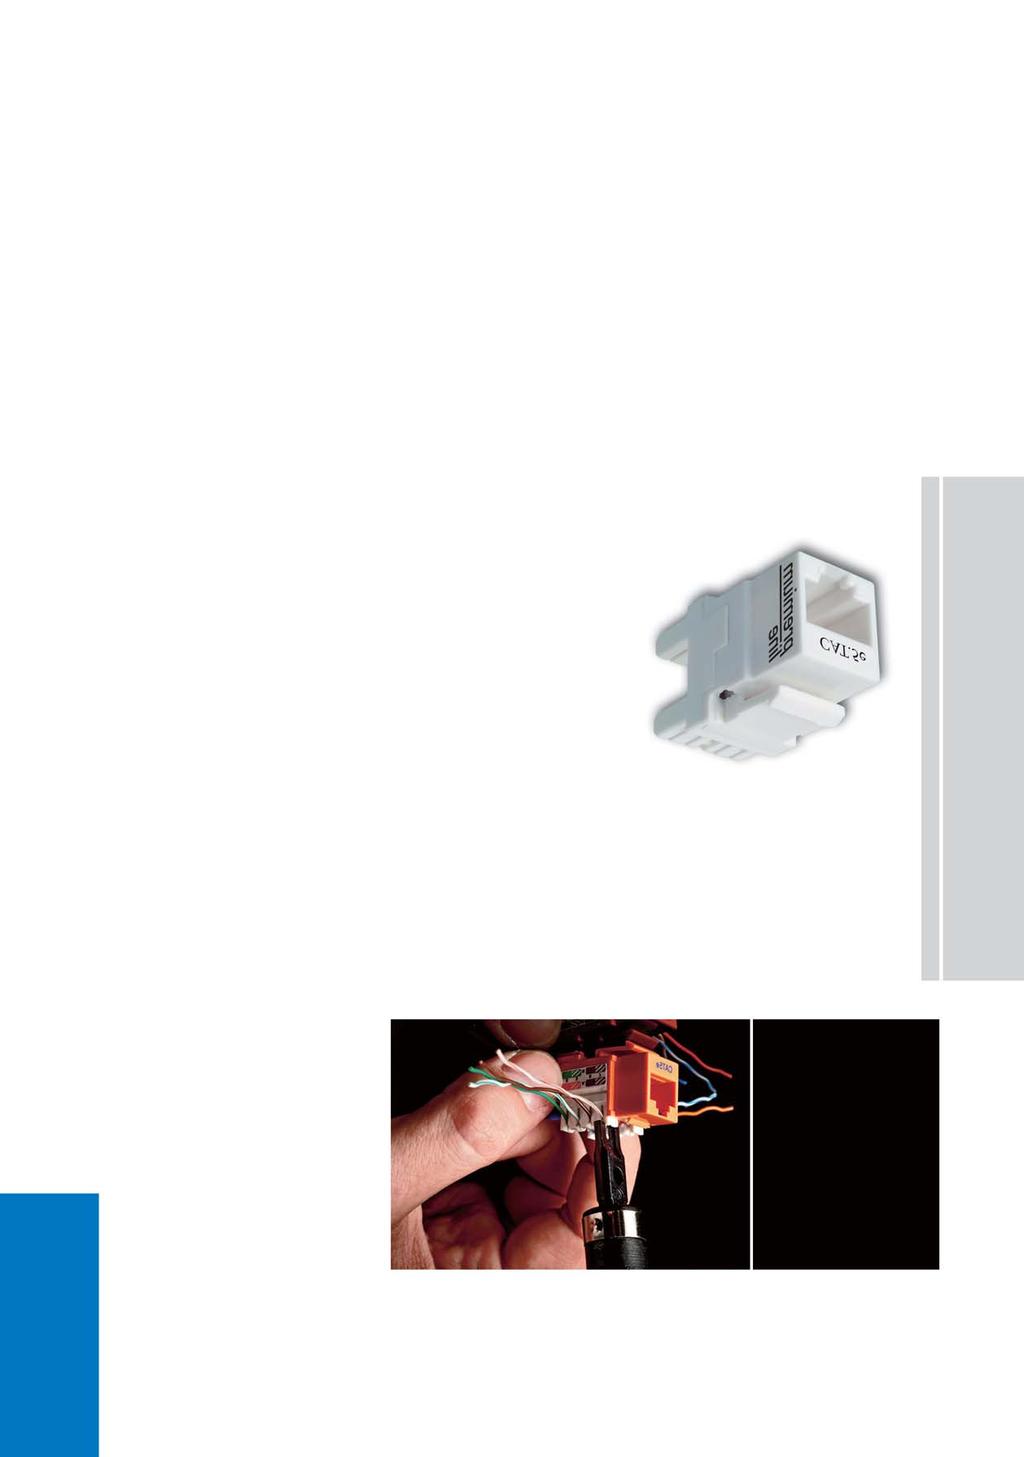 Category 5e 90 Unshielded Premium Line 90 unshielded keystone jack is in classical design, the dual type IDC accepts 22-26 AWG solid cables, easy terminated with 110 or Krone tools, supports T568 A&B